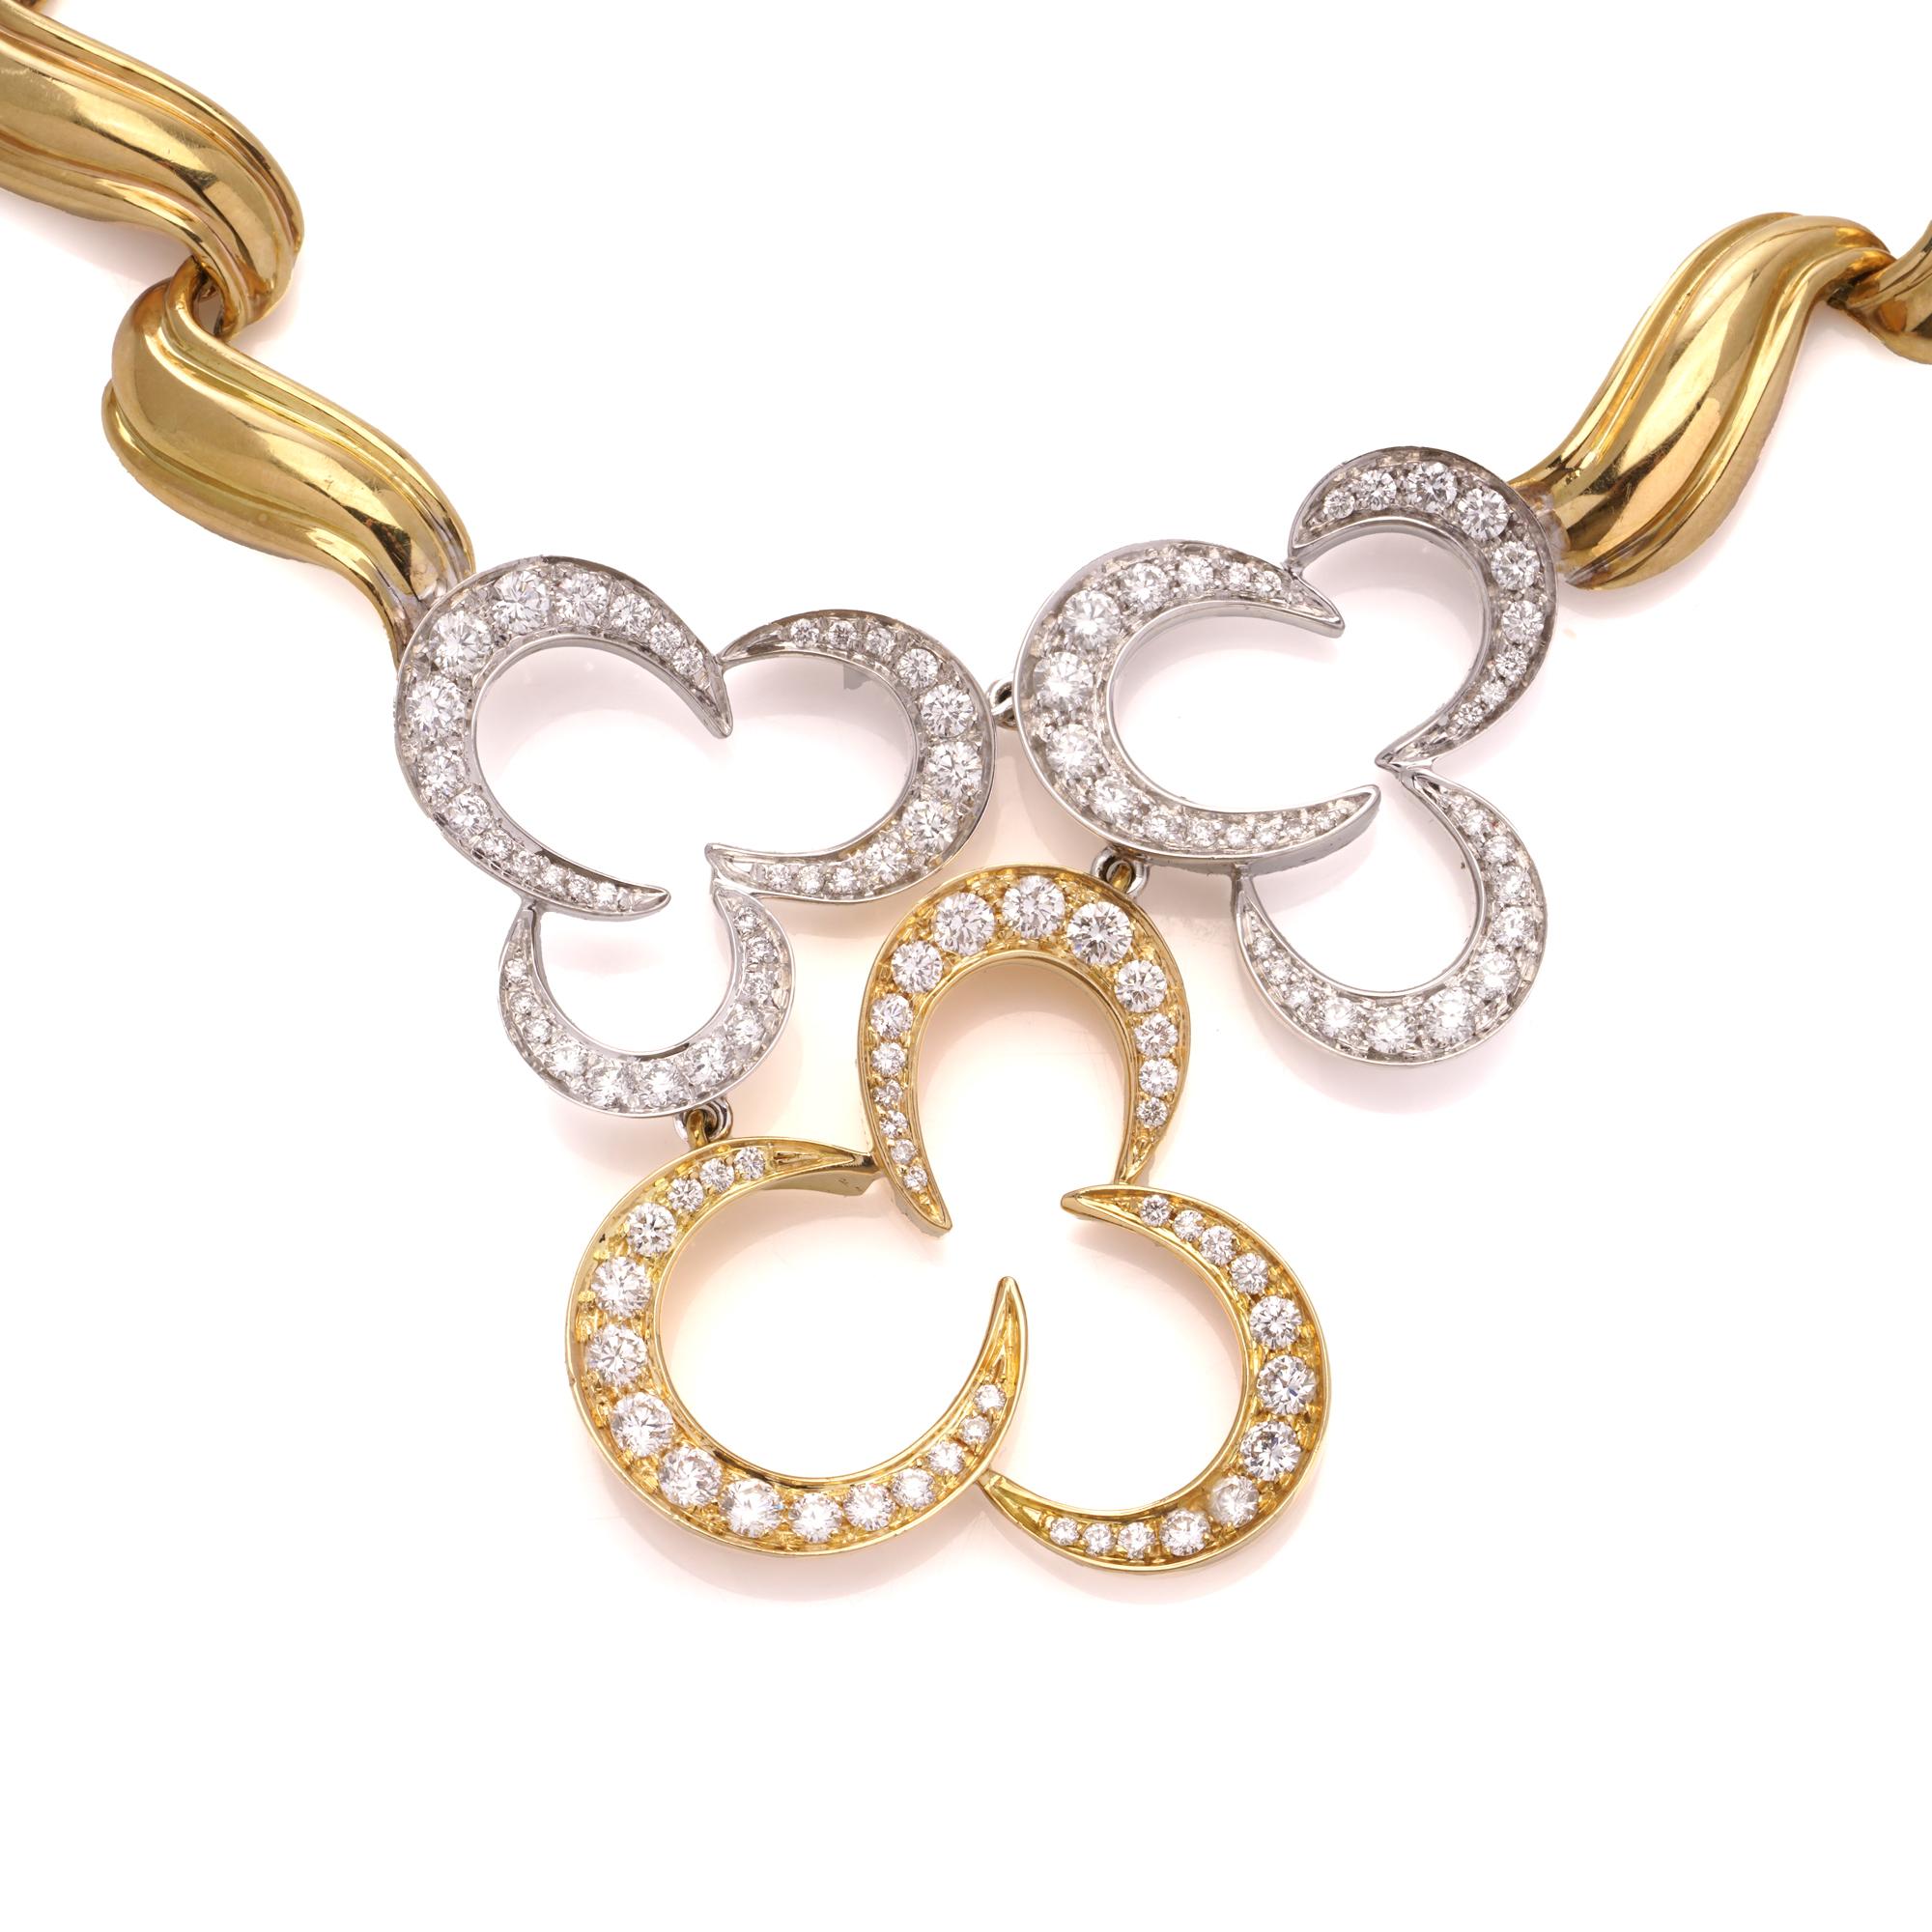 Vintage Chaumet 18kt yellow and white gold chunky bib necklace adorned with three flower head-shaped pendants set with round brilliant diamonds.
Fully hallmarked. 

Dimensions:
Inner Width: 15 cm 
pendant length x width: 5 x 5 cm 
Weight: 93 grams